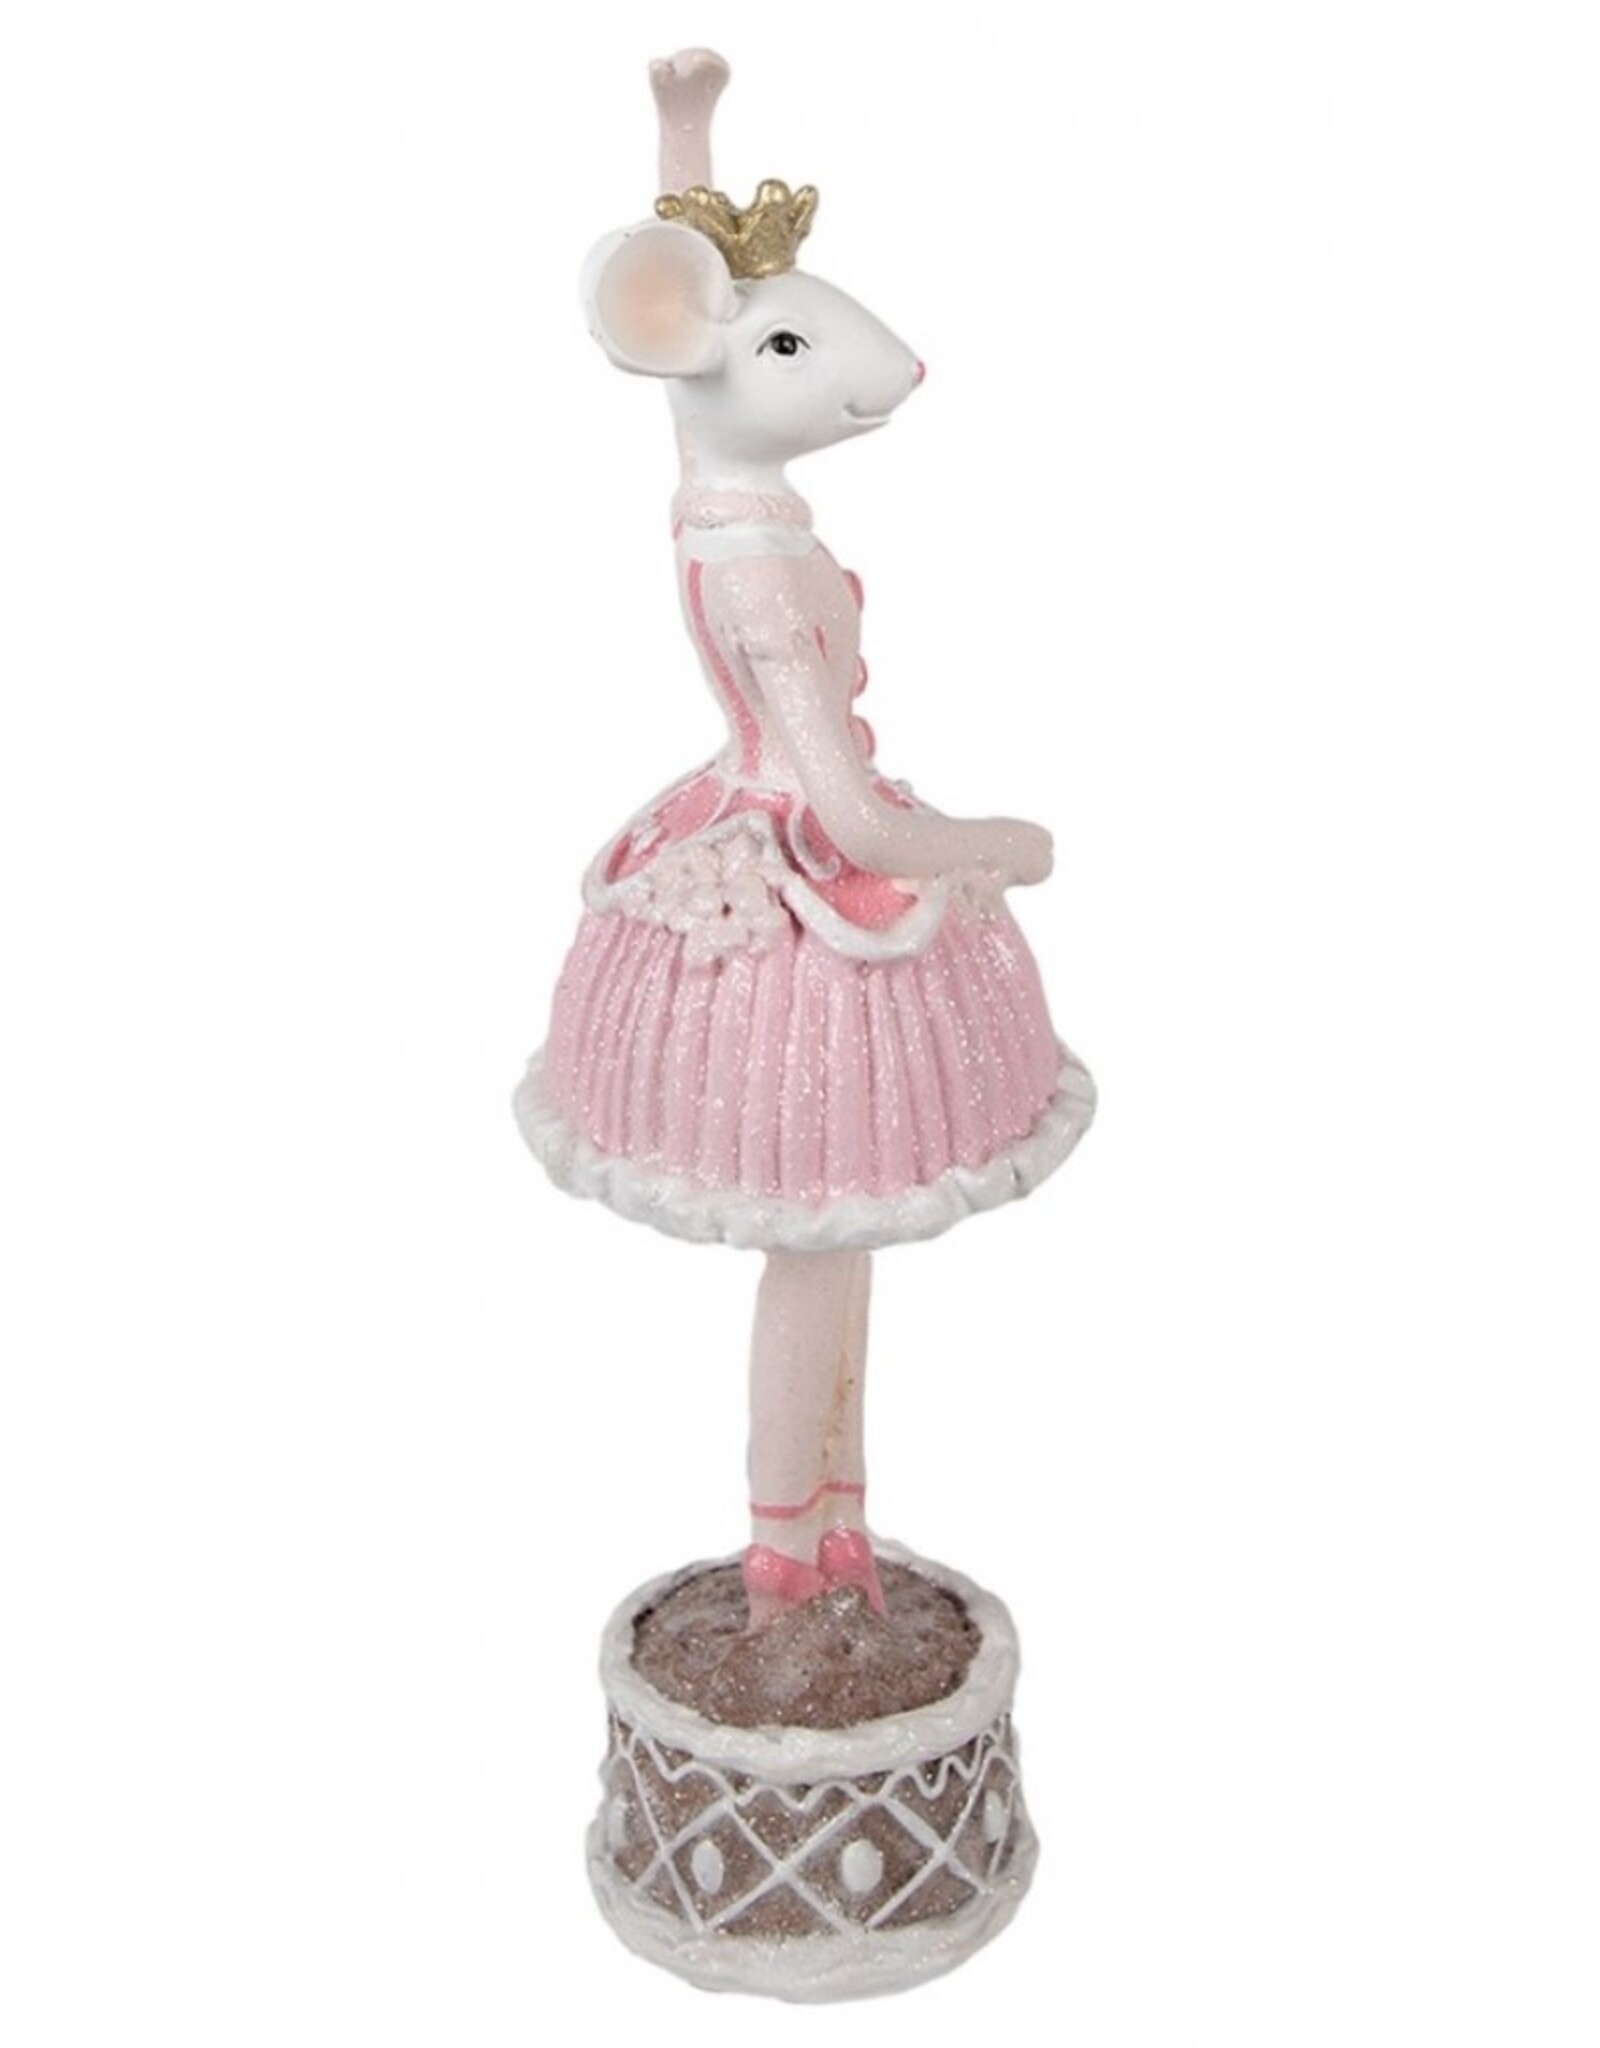 C&E Giftware Figurines Collectables - Figurine Mouse Ballerina Dancing 27cm